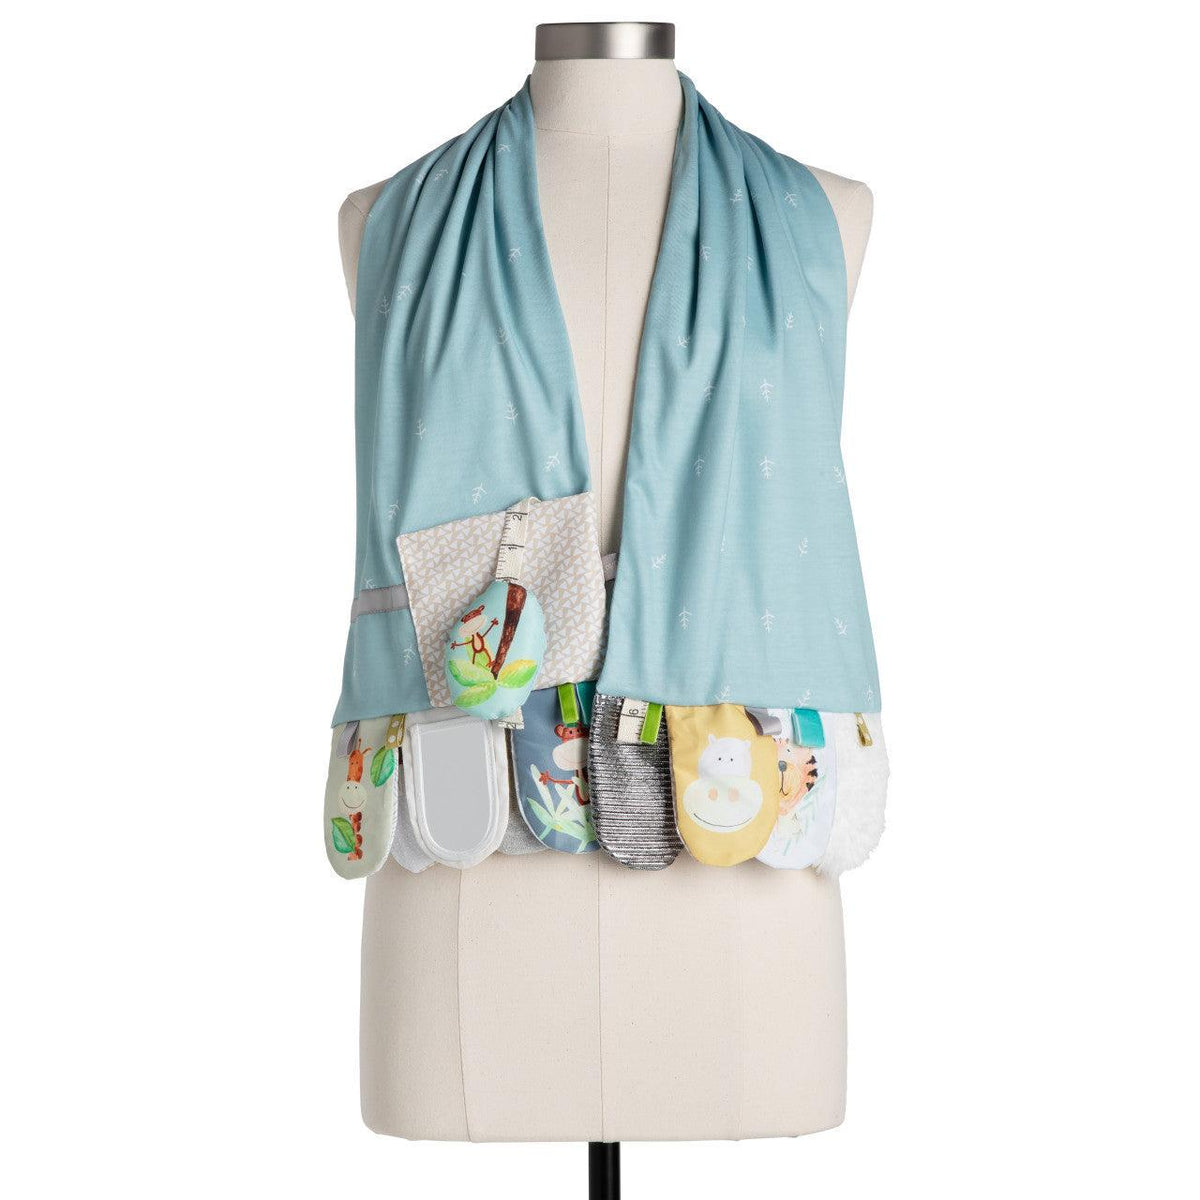 Mommy & Me Activity Scarf - 39 North CO 